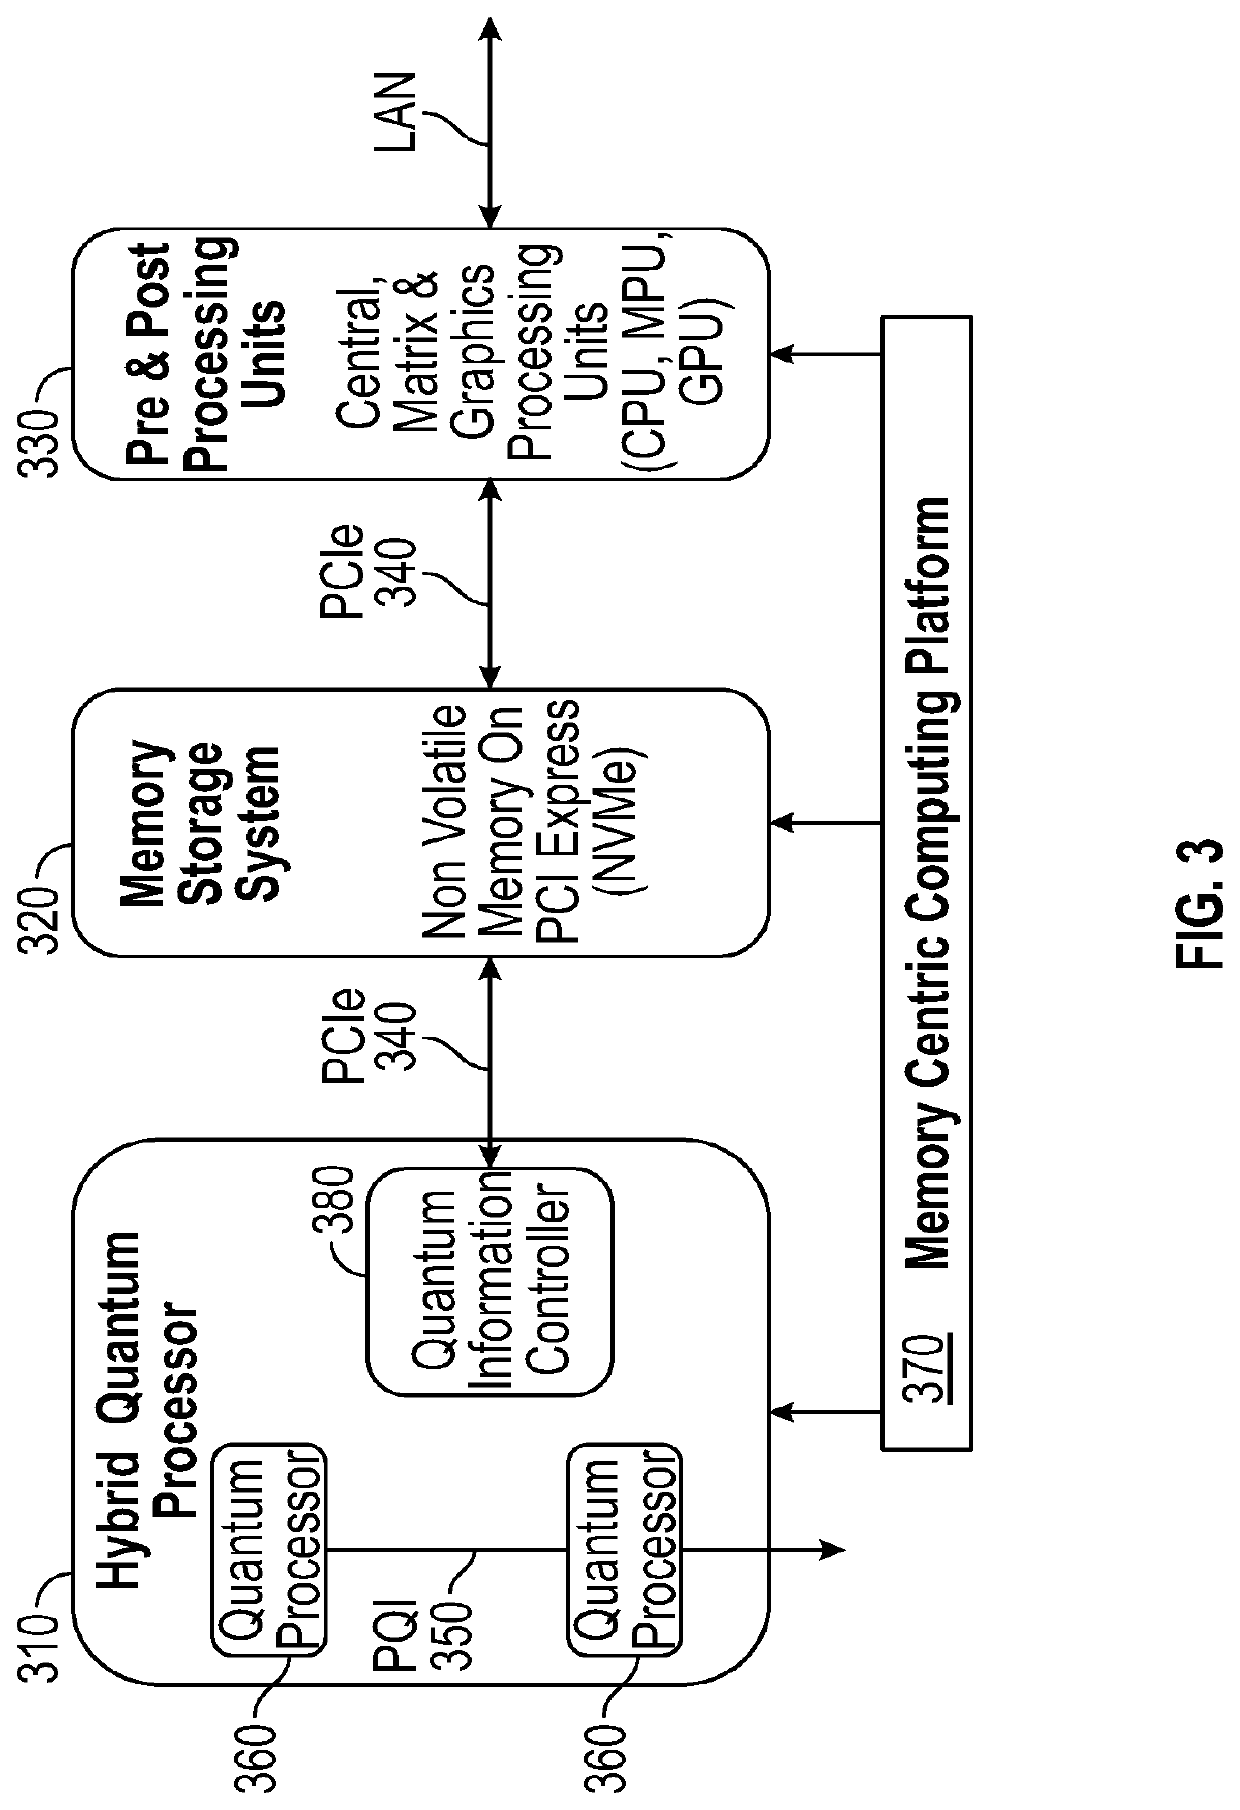 Systems and methods involving hybrid quantum machines, aspects of quantum information technology and/or other features